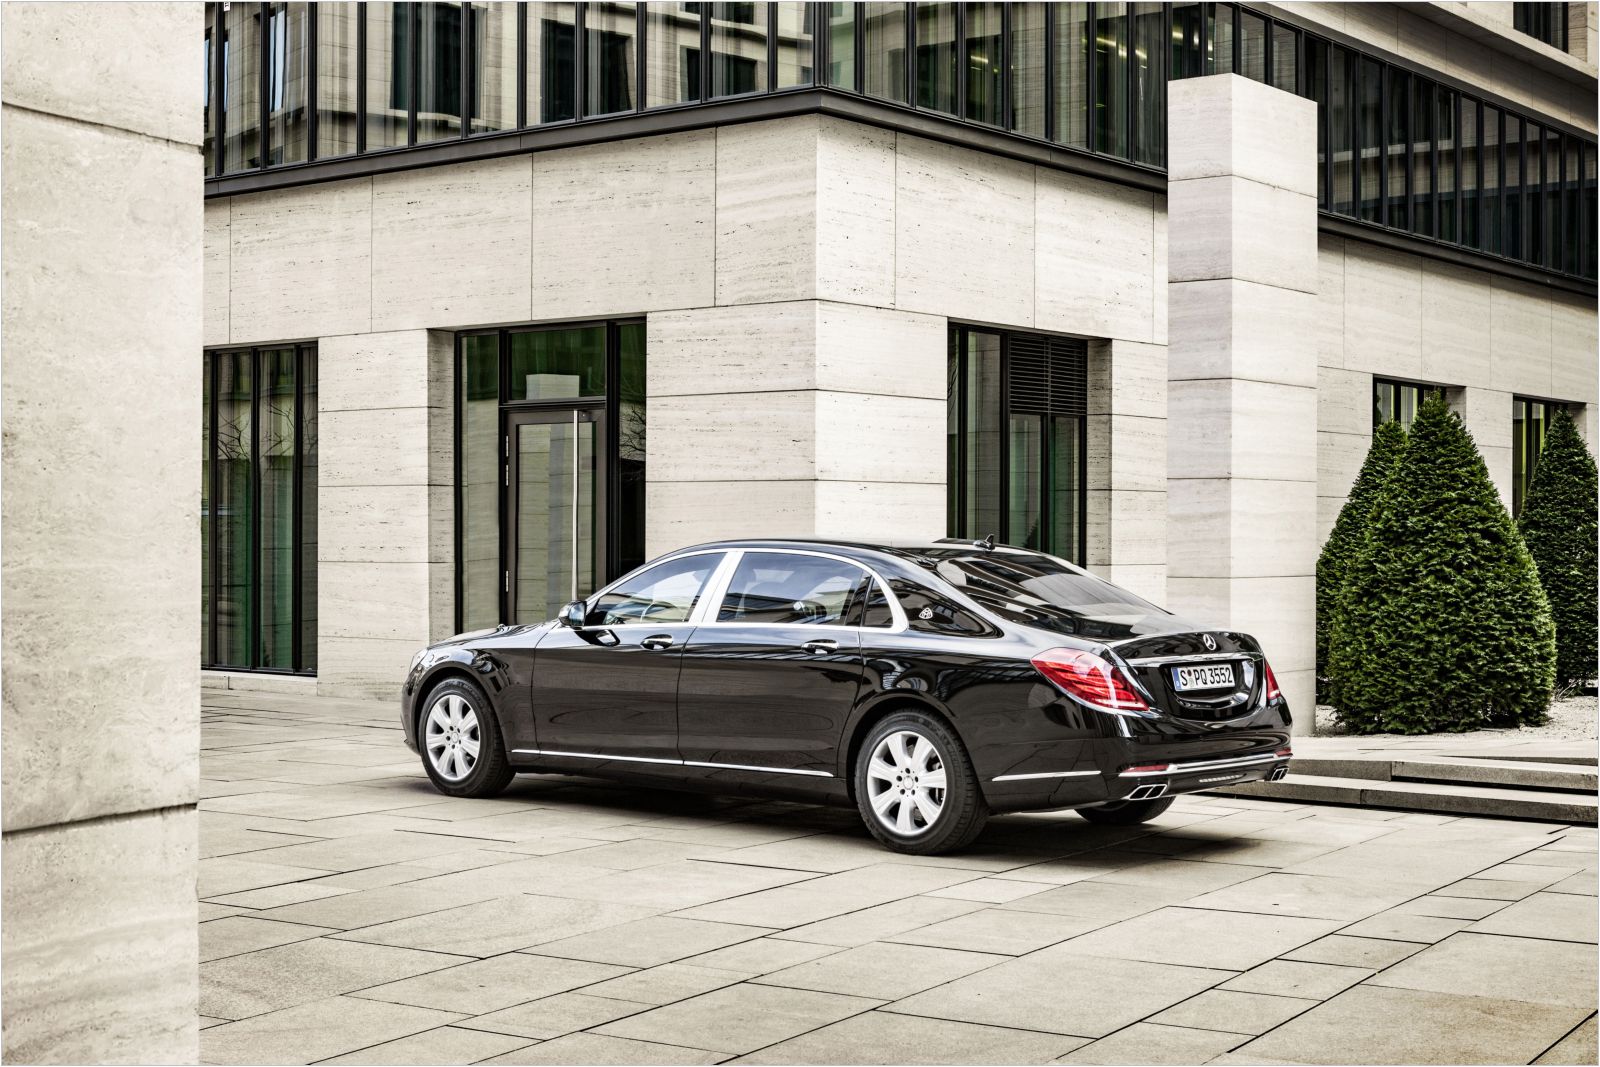 Mercedes-Benz S600 Maybach Guard, 1600x1067px, img-2